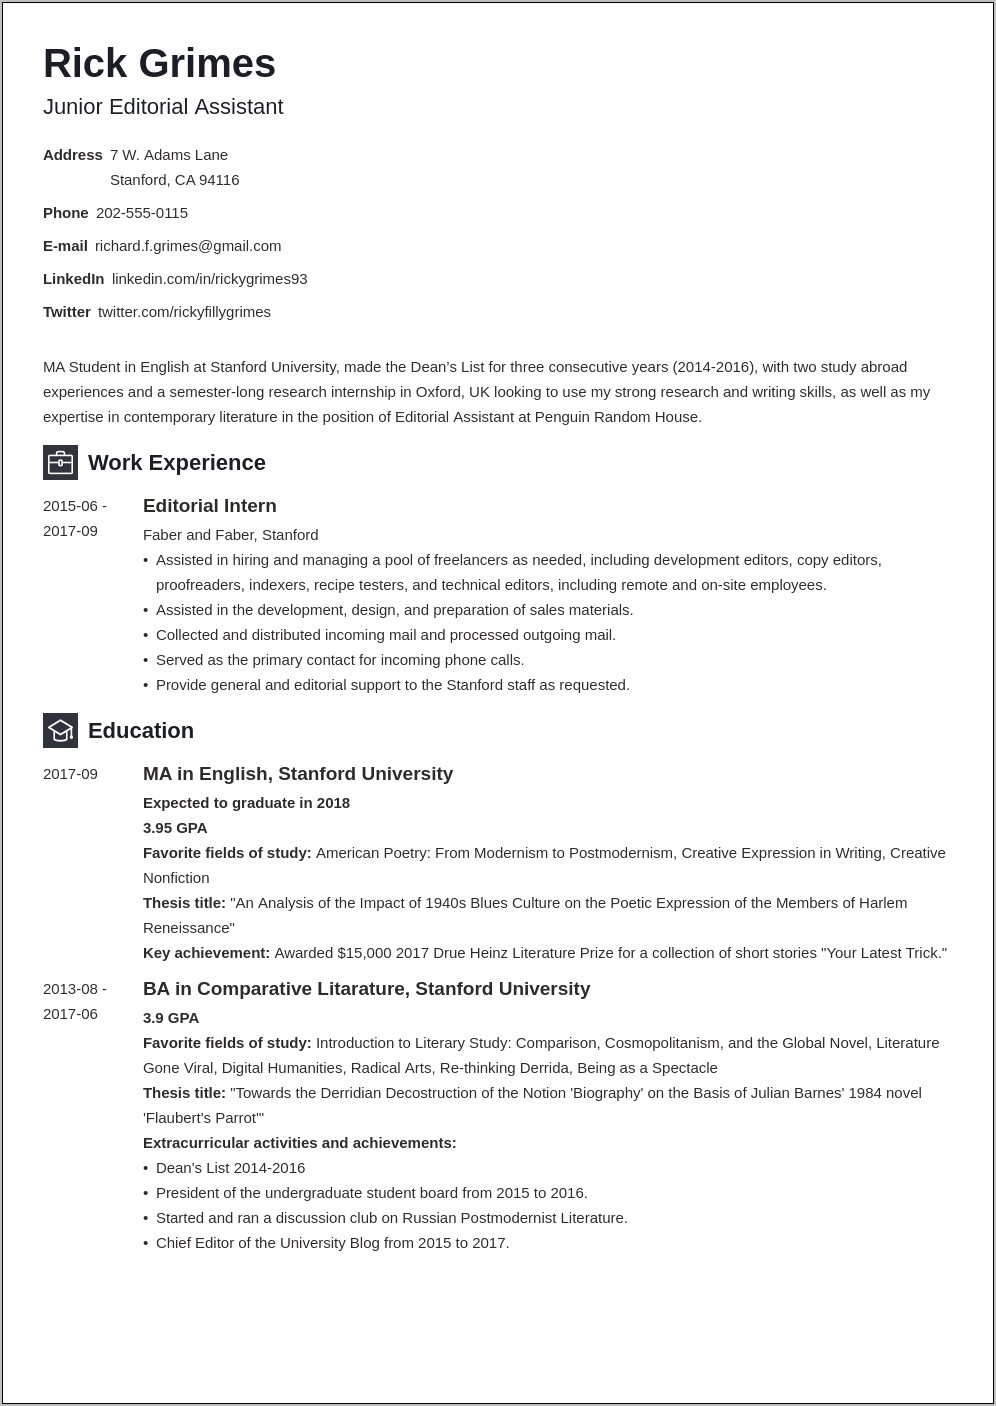 Resume For A Job After Graduate School